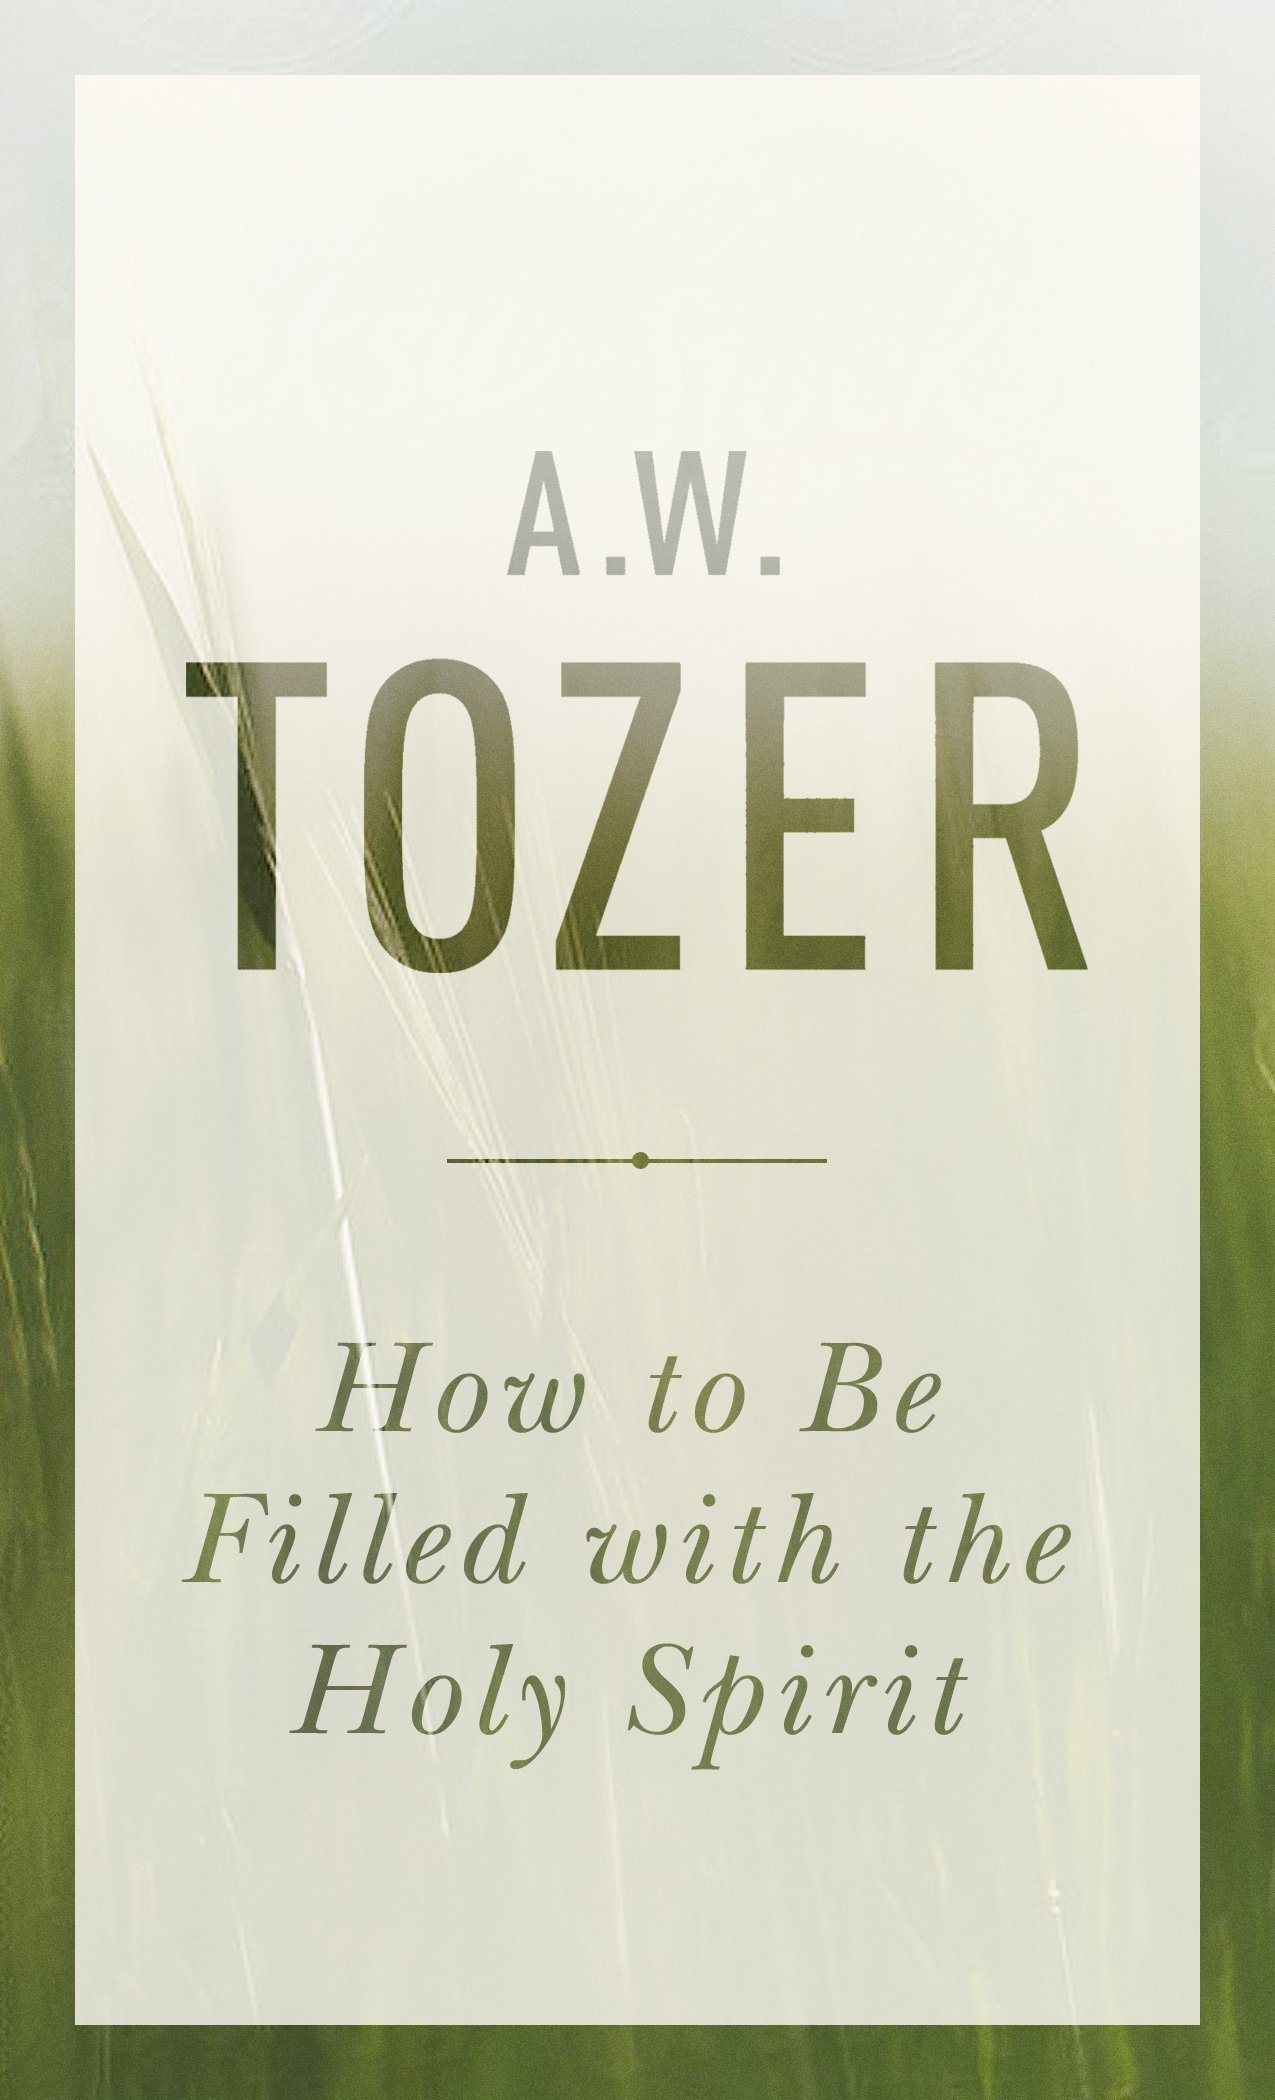 How to be Filled with the Holy Spirit - AW Tozer